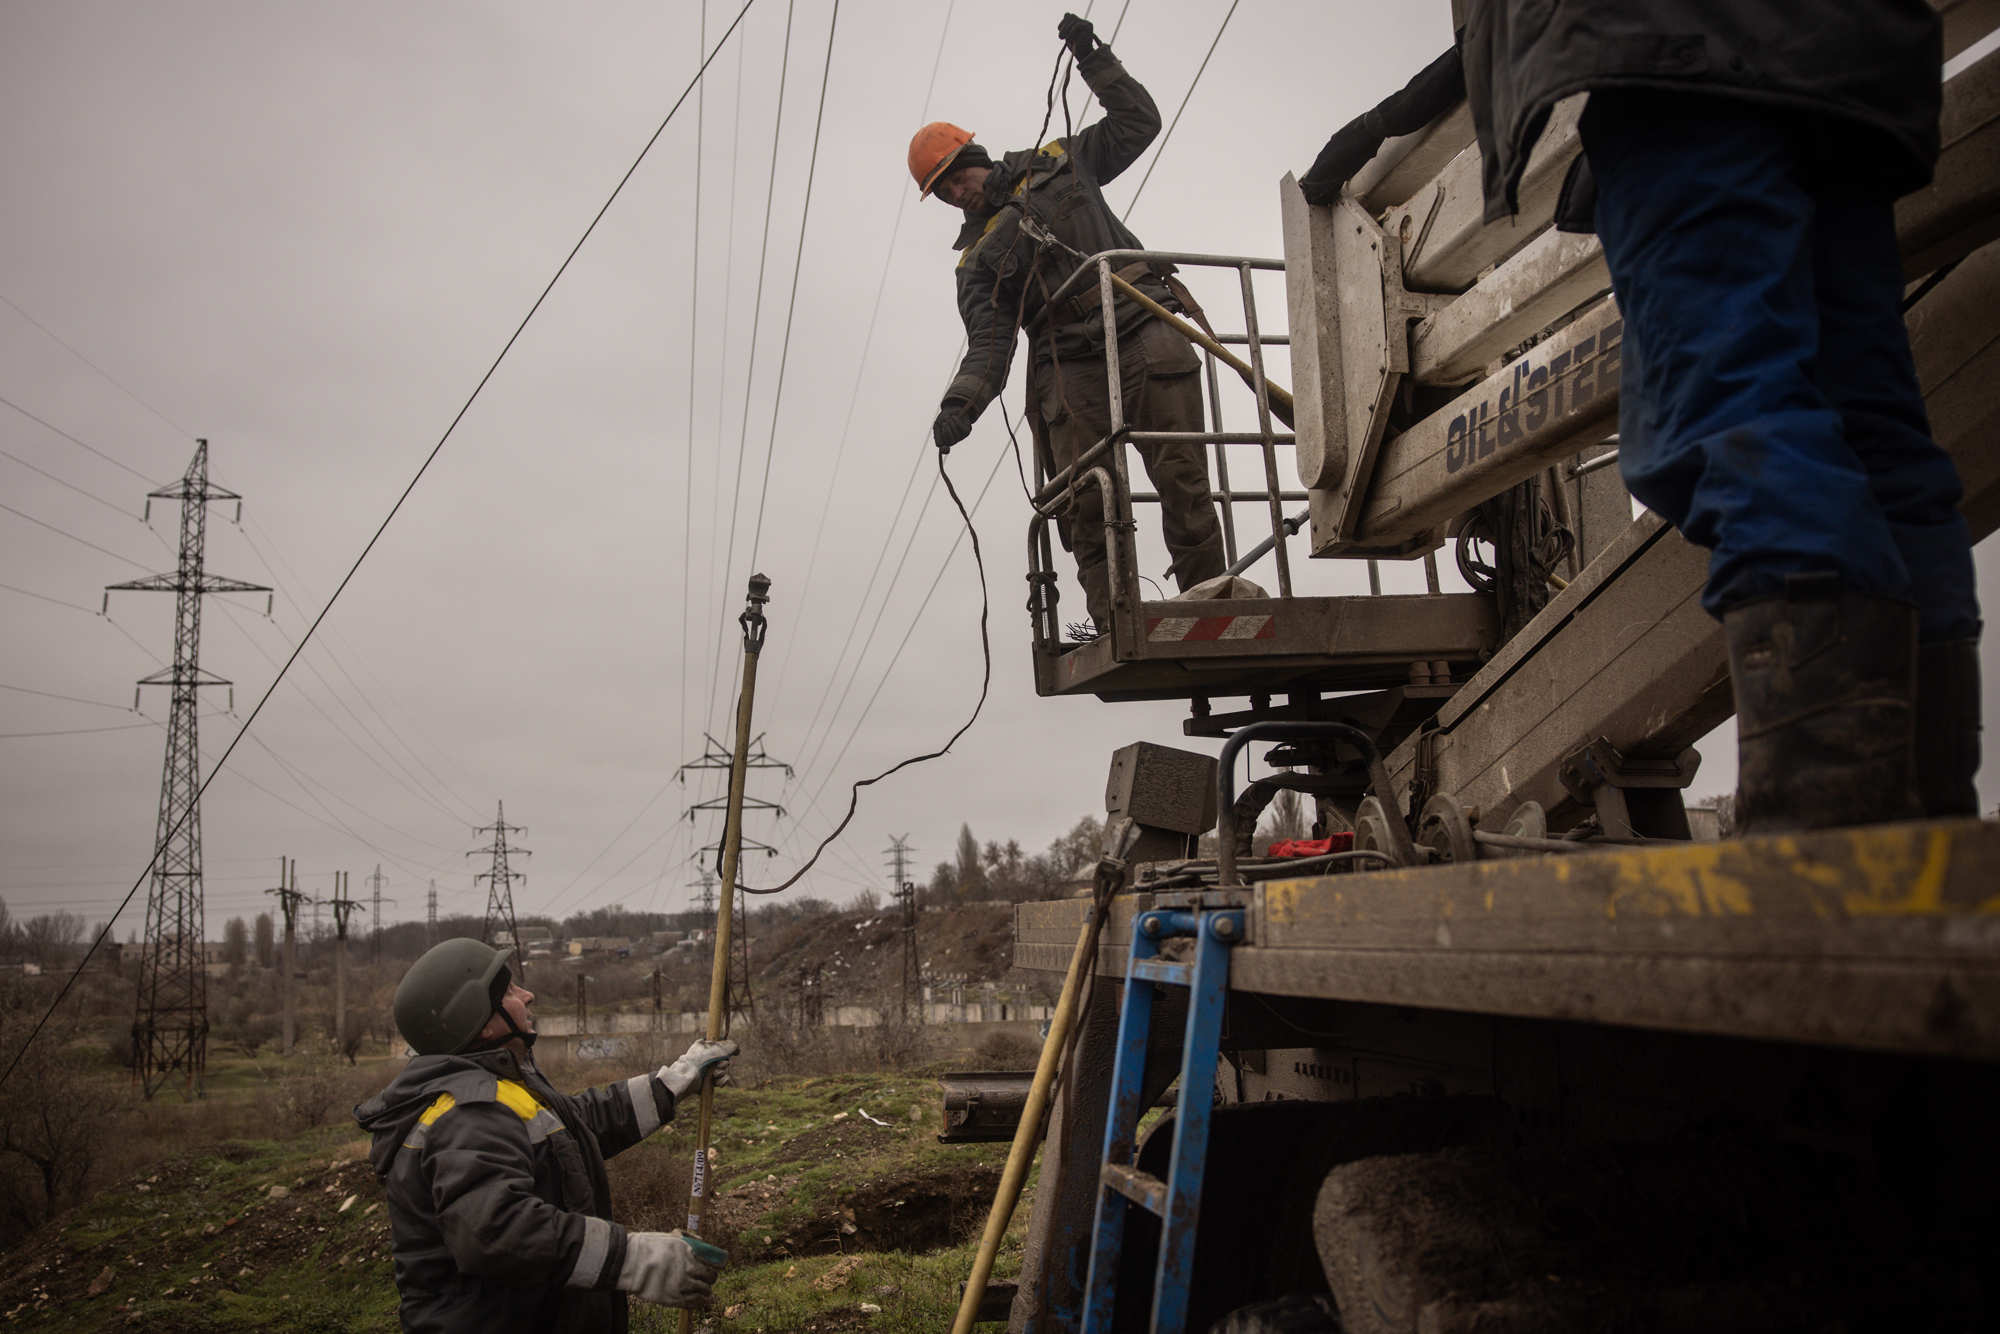 The electricity and water supply in the city of Kherson has been largely restored, officials said